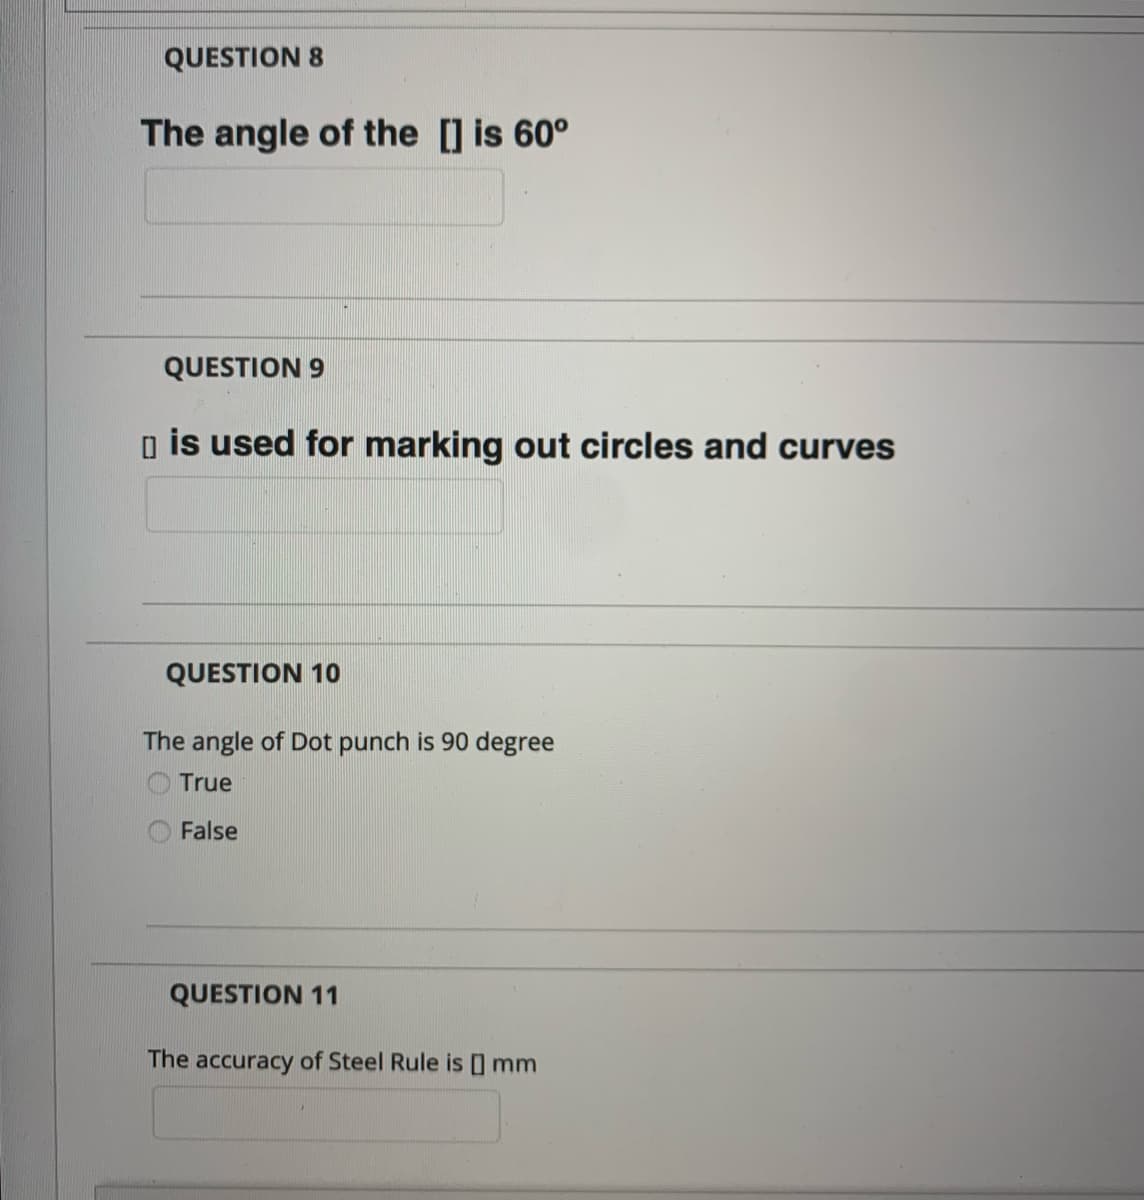 QUESTION 8
The angle of the [] is 60°
QUESTION 9
o is used for marking out circles and curves
QUESTION 10
The angle of Dot punch is 90 degree
True
False
QUESTION 11
The accuracy of Steel Rule is I mm
